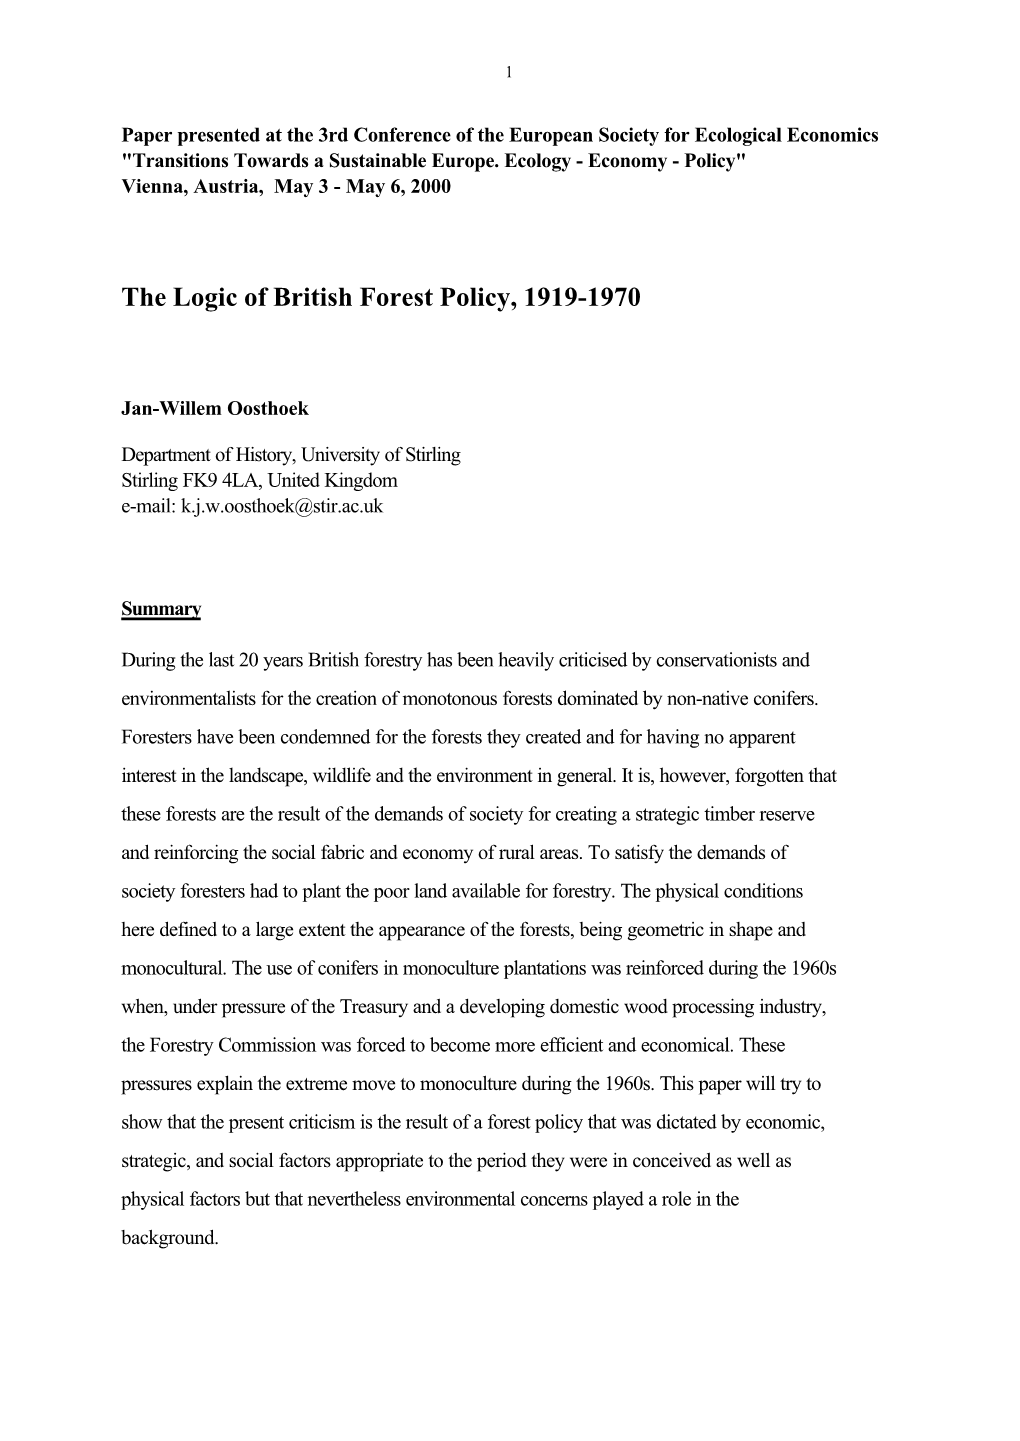 The Logic of British Forest Policy, 1919-1970